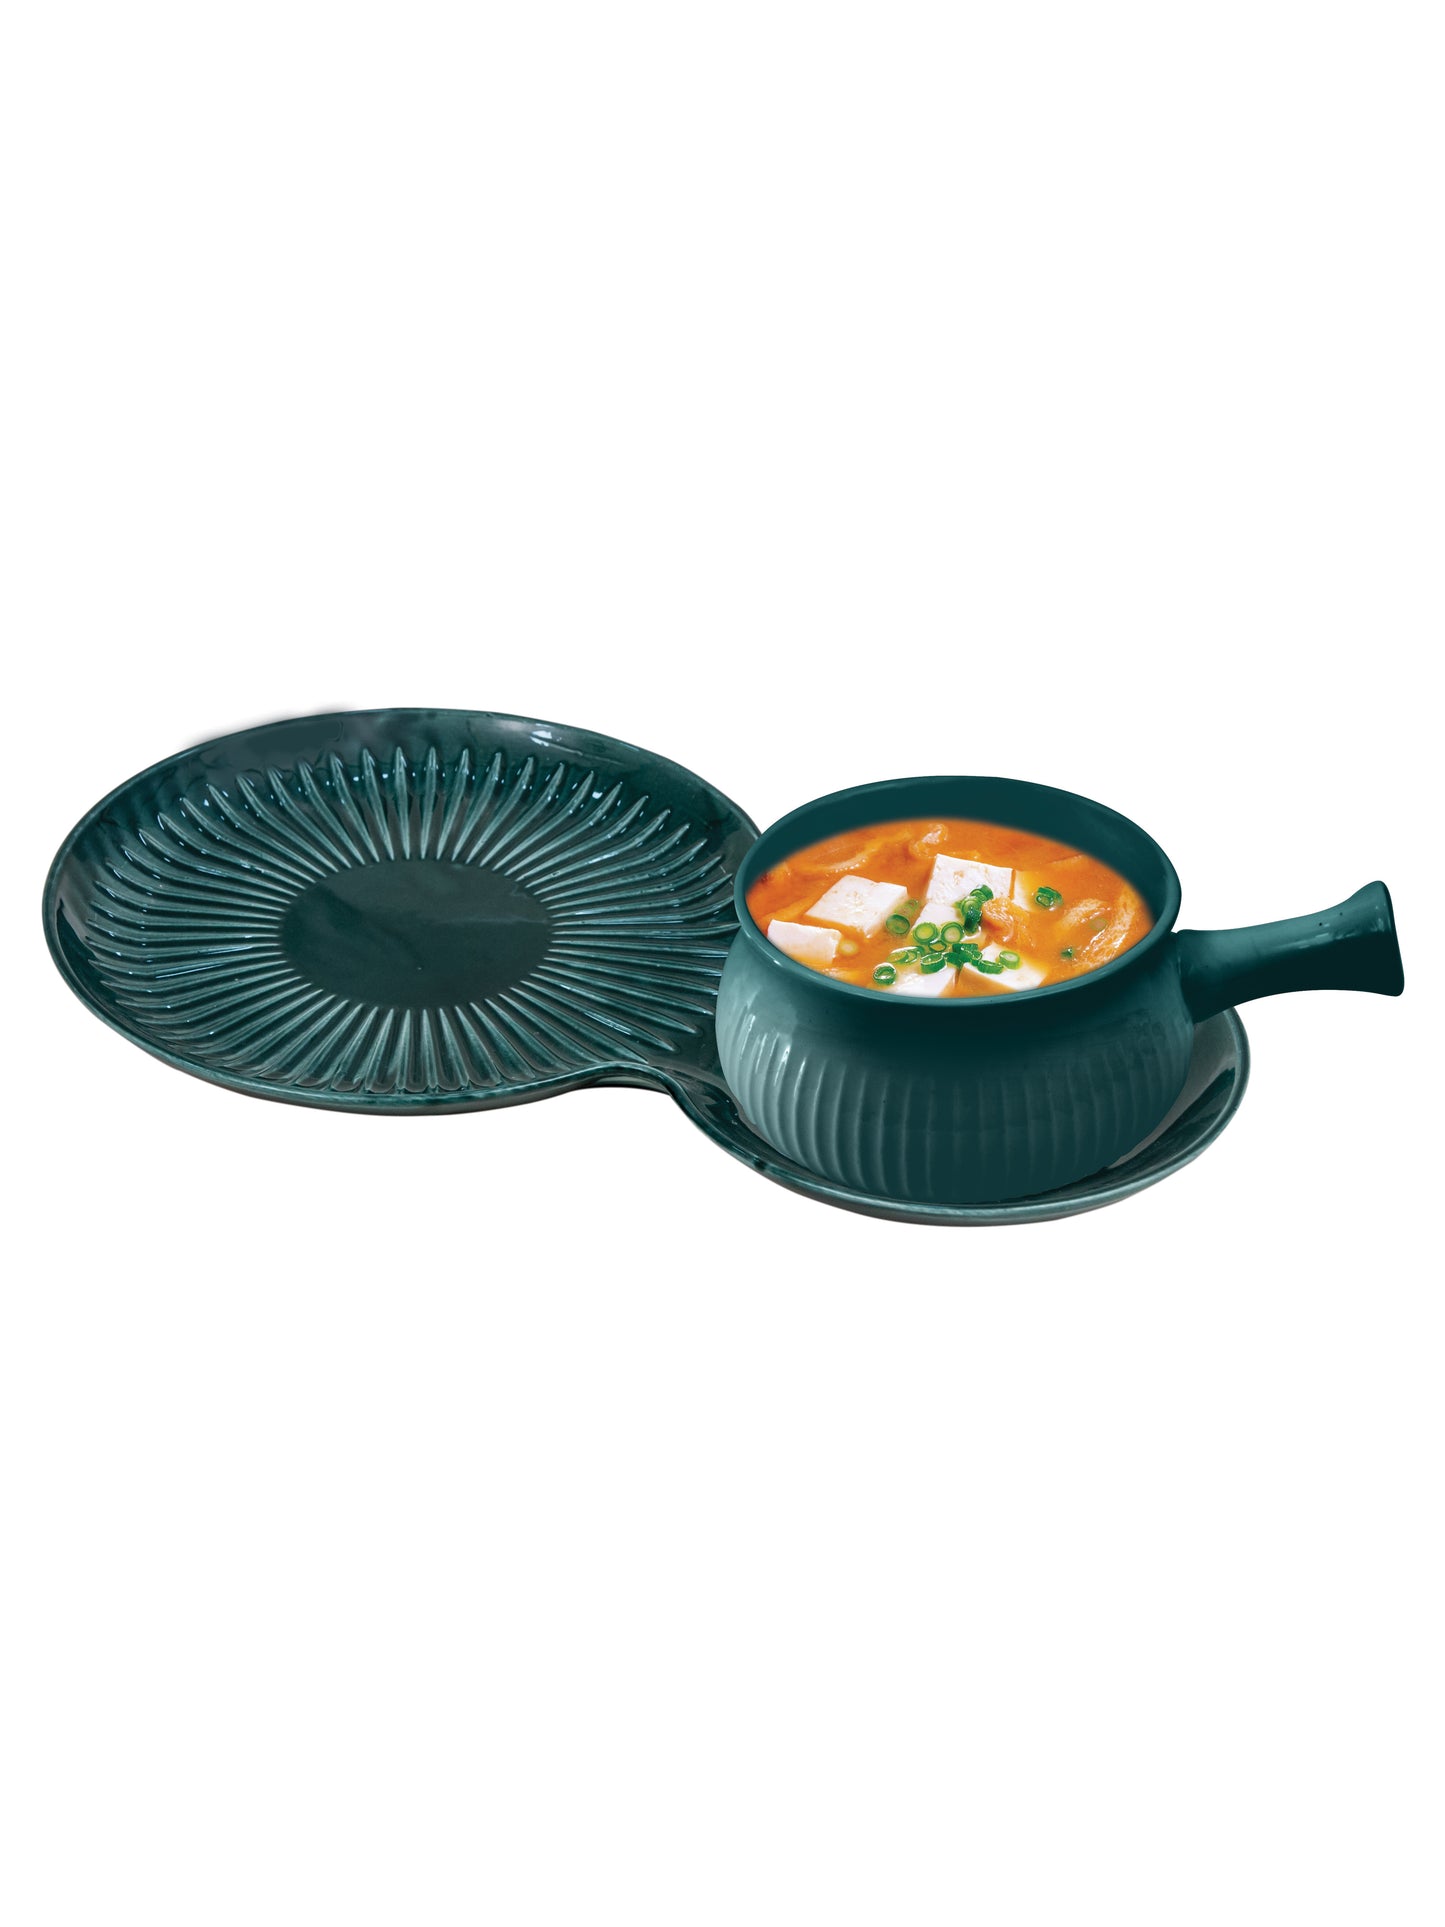 Grande Bowl and Large Plate Set for Snack and Serving, 2 pcs, Green